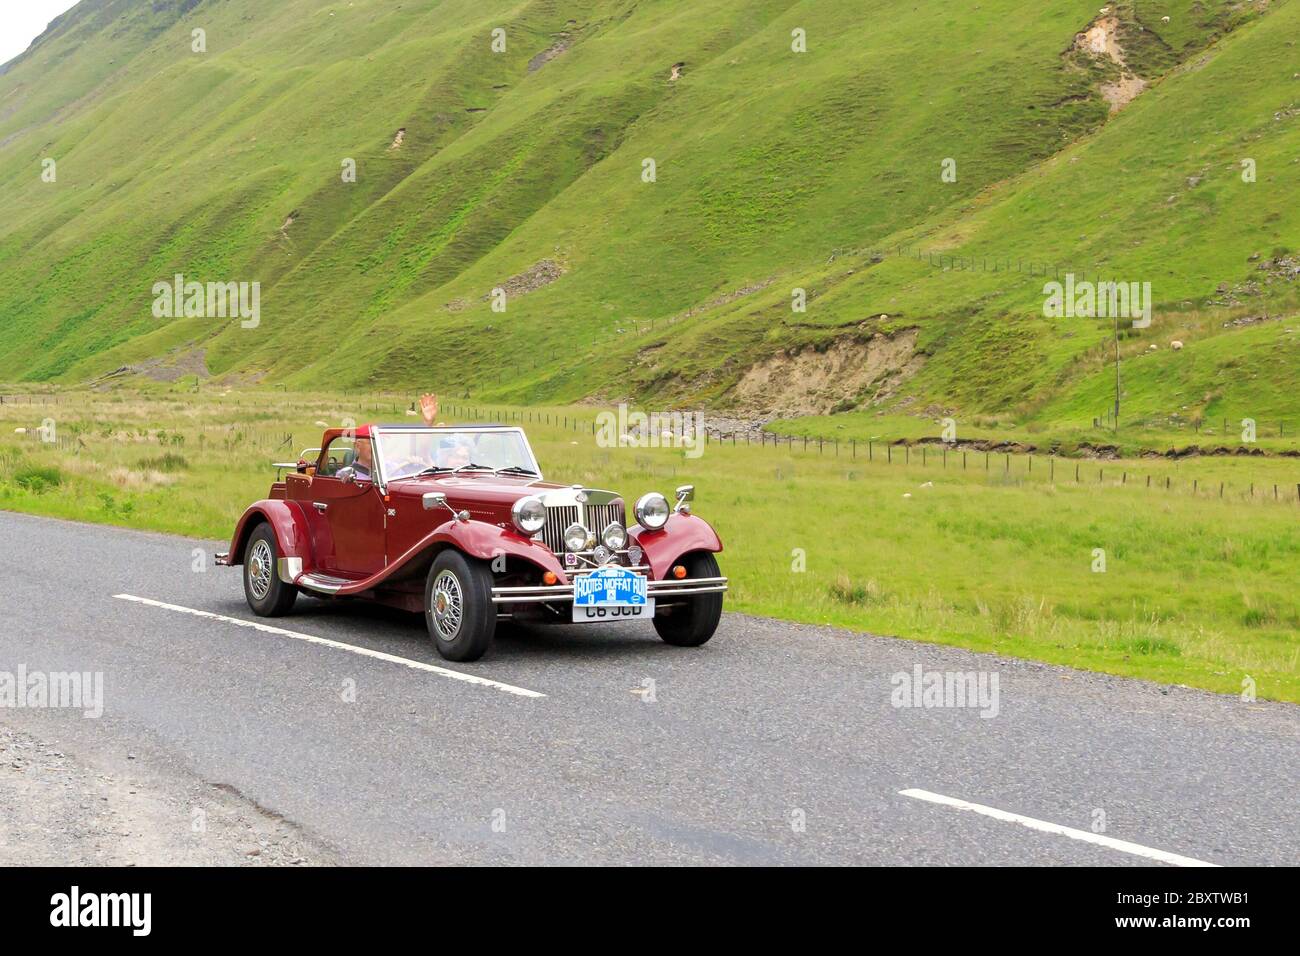 MOFFAT, SCOTLAND - JUNE 29, 2019: JBA Falcon Sports car in a classic car rally en route towards the town of Moffat, Dumfries and Galloway Stock Photo